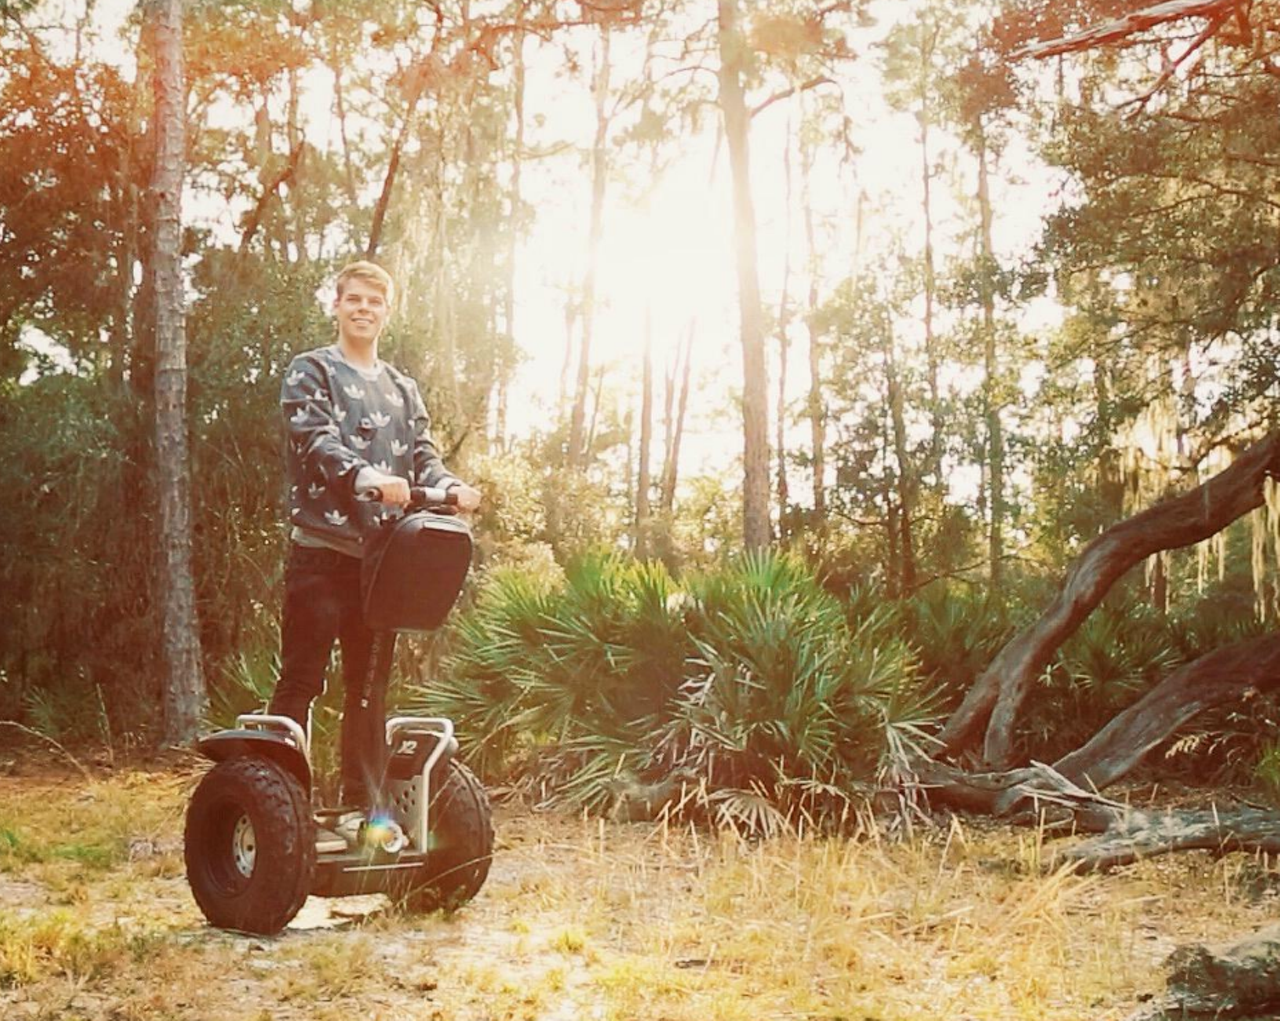  Lake Kissimmee State Park Segway Tour  
14248 Camp Mack Road, Lake Wales, 863-514-3474, $45
Explore Lake Kissimmee State Park in a way that won&#146;t hurt your feet. Back Trail Adventures of Florida through a 70-minute guided tour of the park. The tour operates Thursday through Sunday from 8:30 a.m. to 3:30 p.m. 
Photo via benwmarsh/Tripadvisor